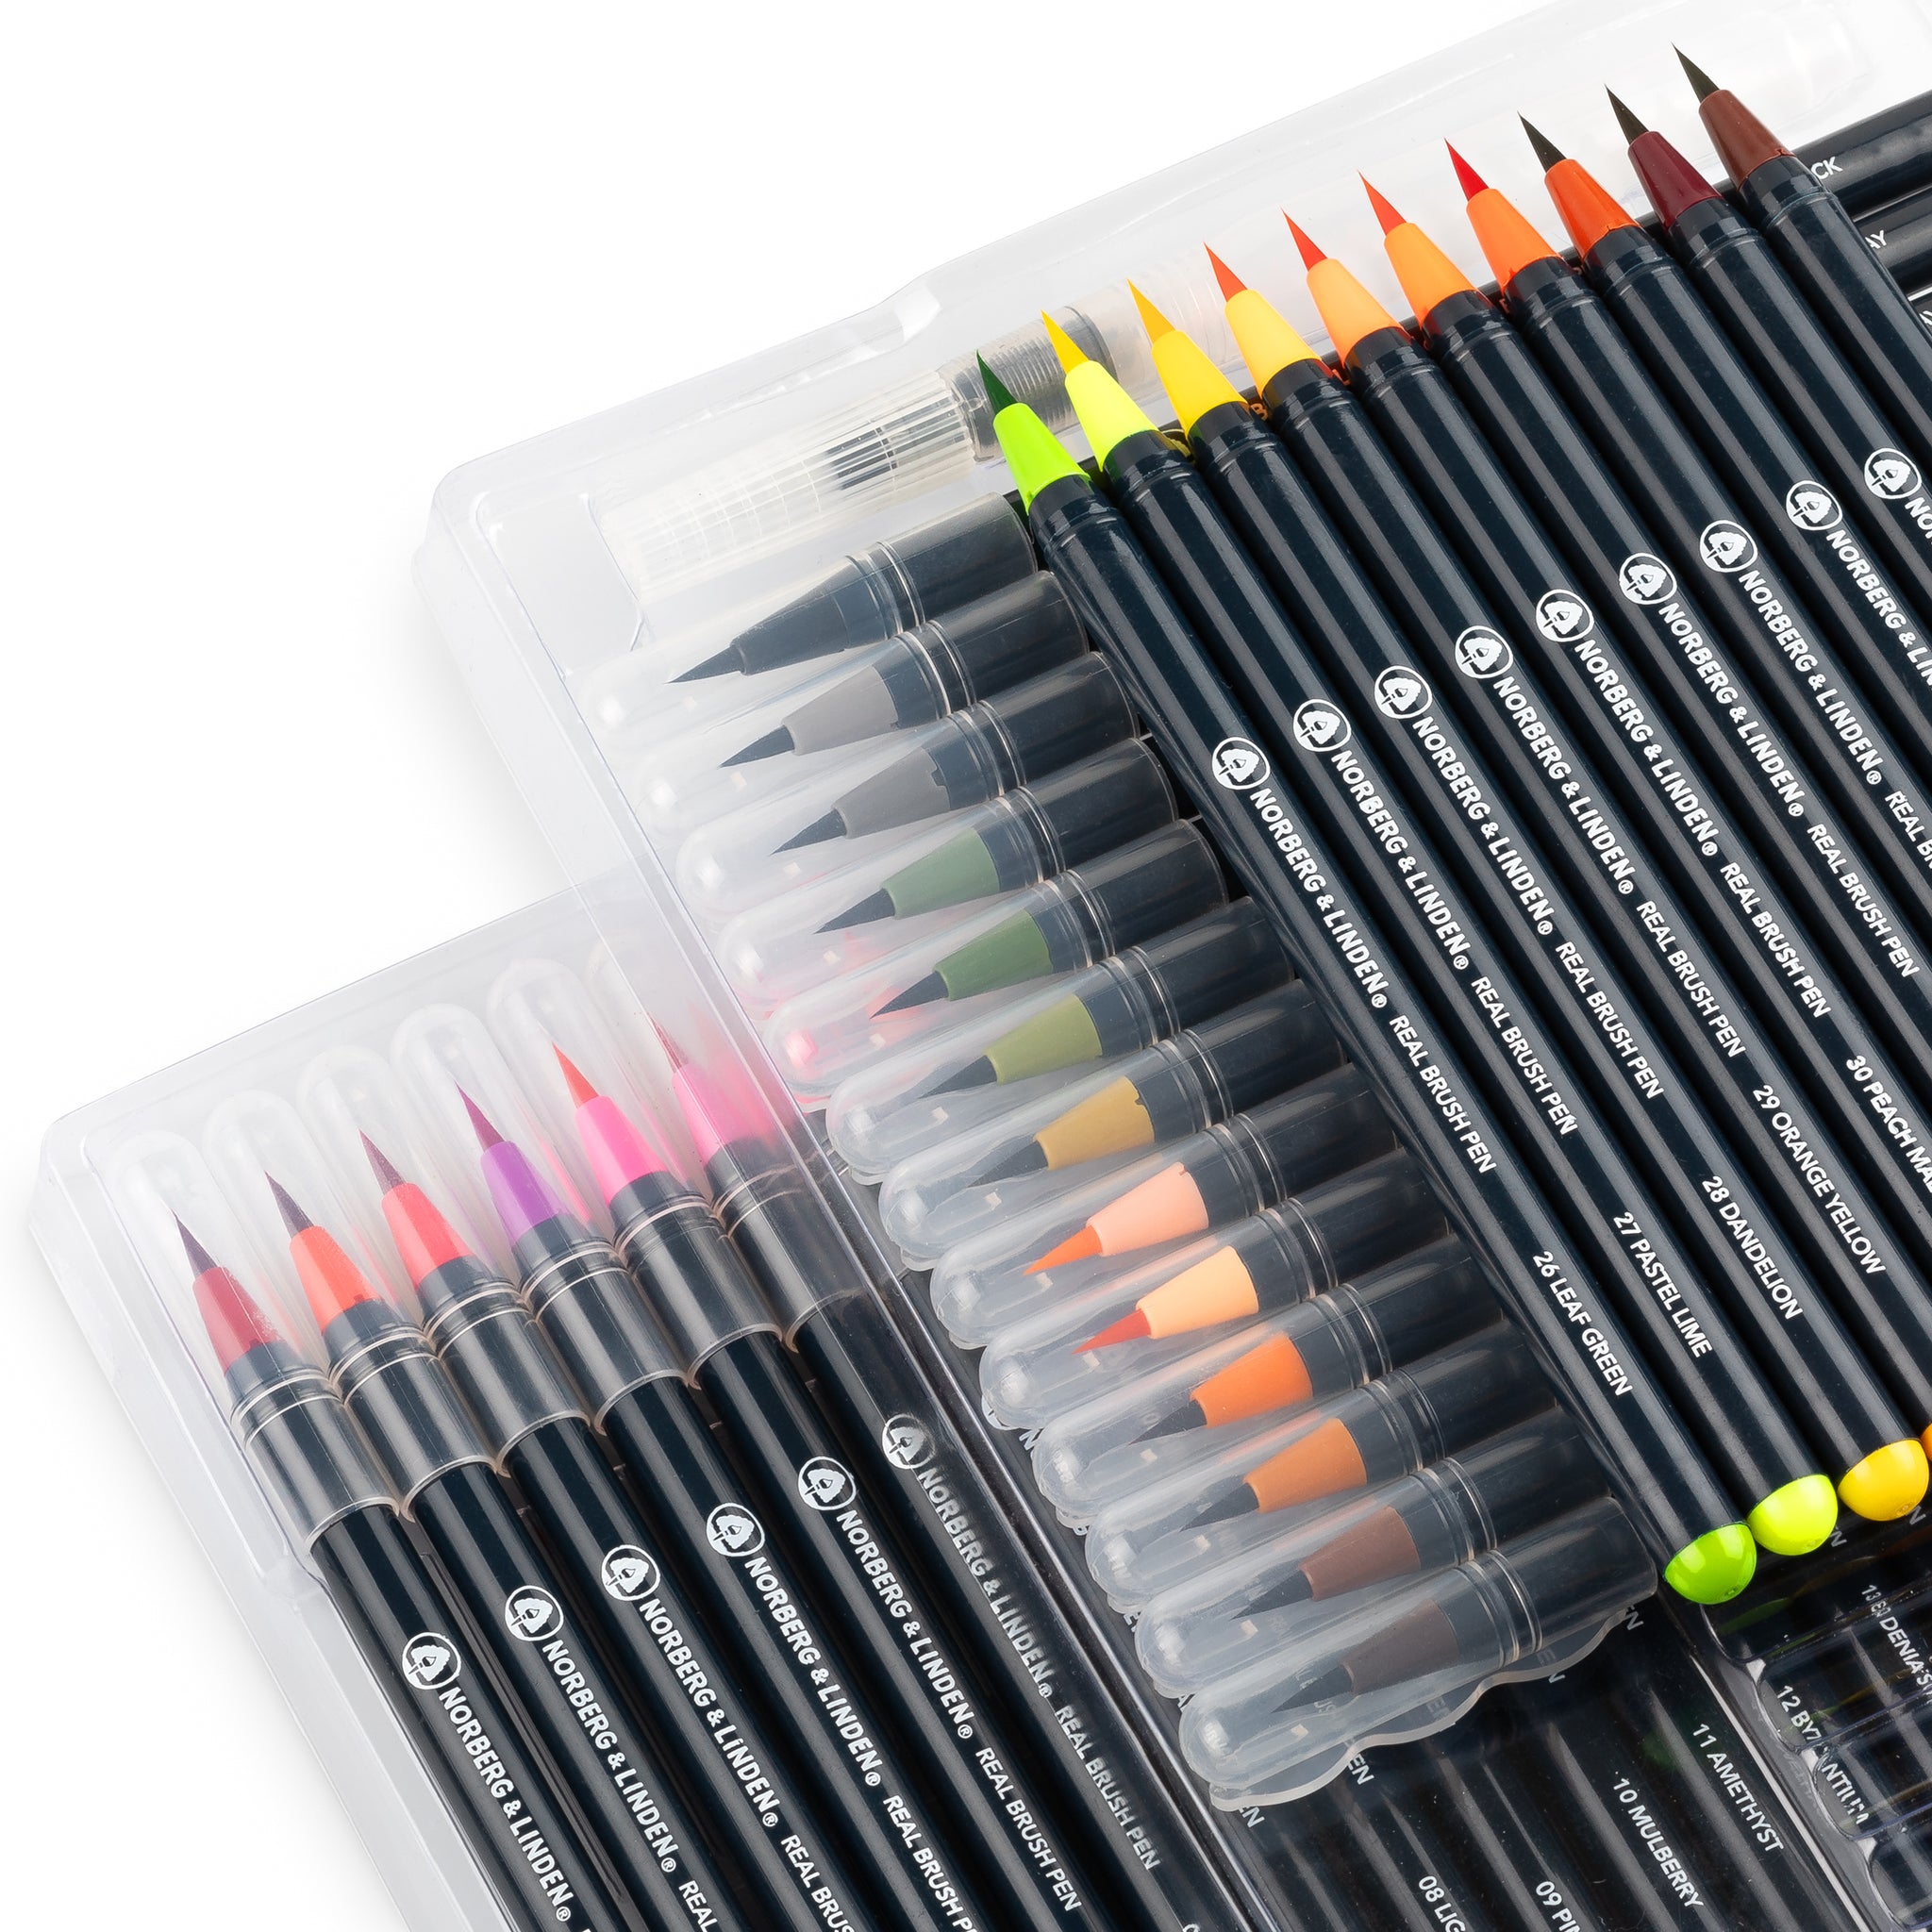 Real Waterbrush Set - 48 Watercolor Paint Markers, 1 Refillable